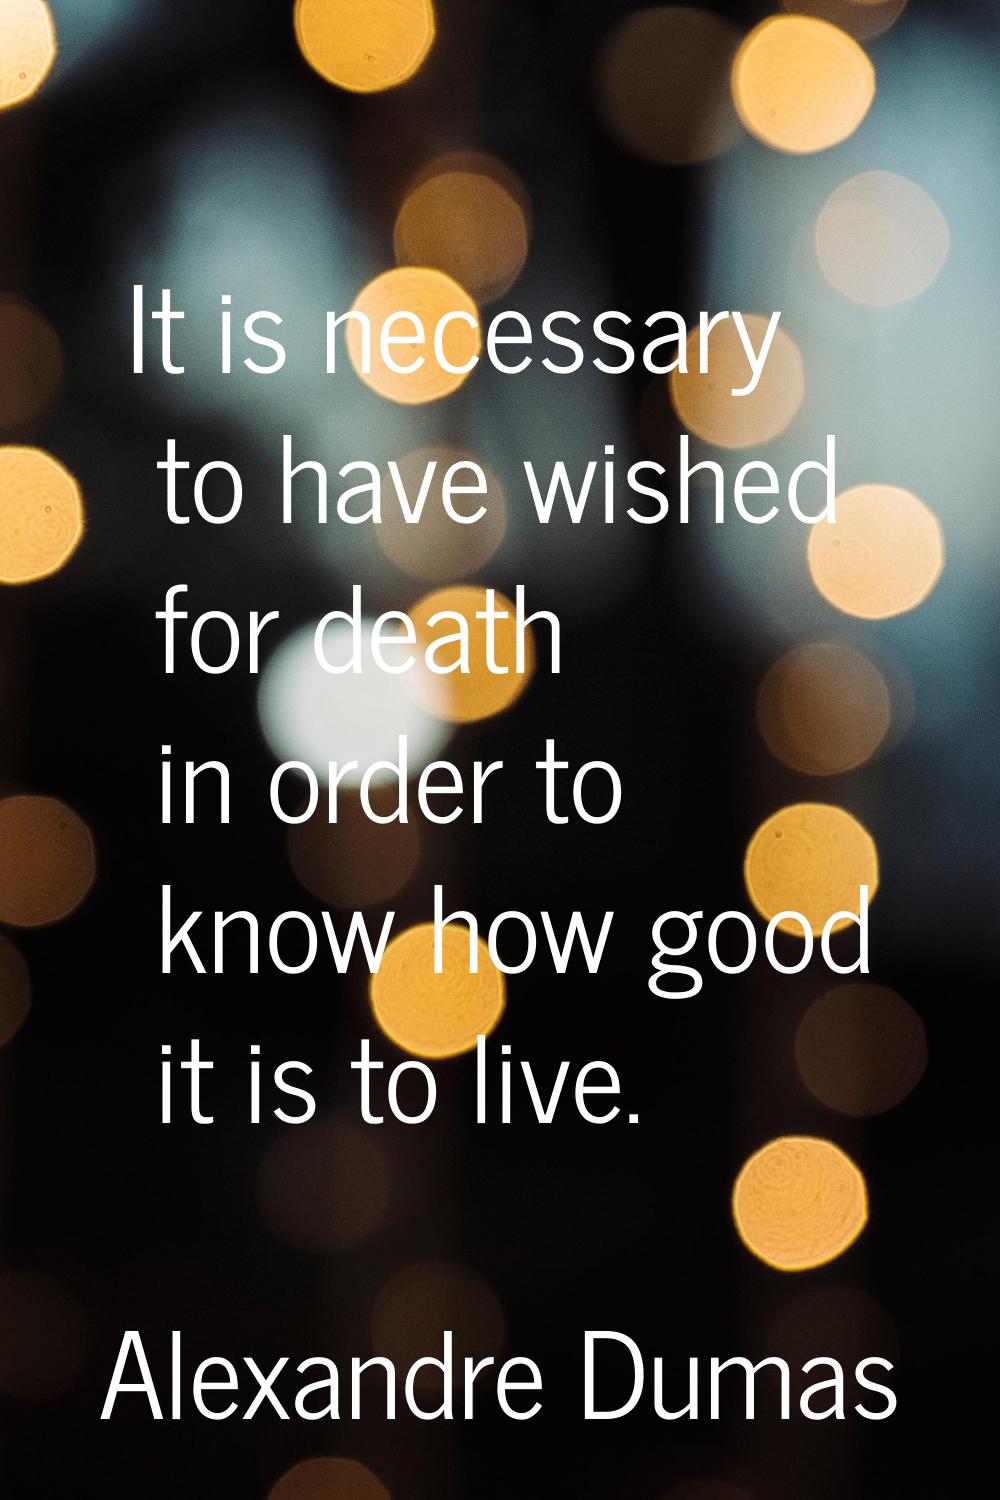 It is necessary to have wished for death in order to know how good it is to live.